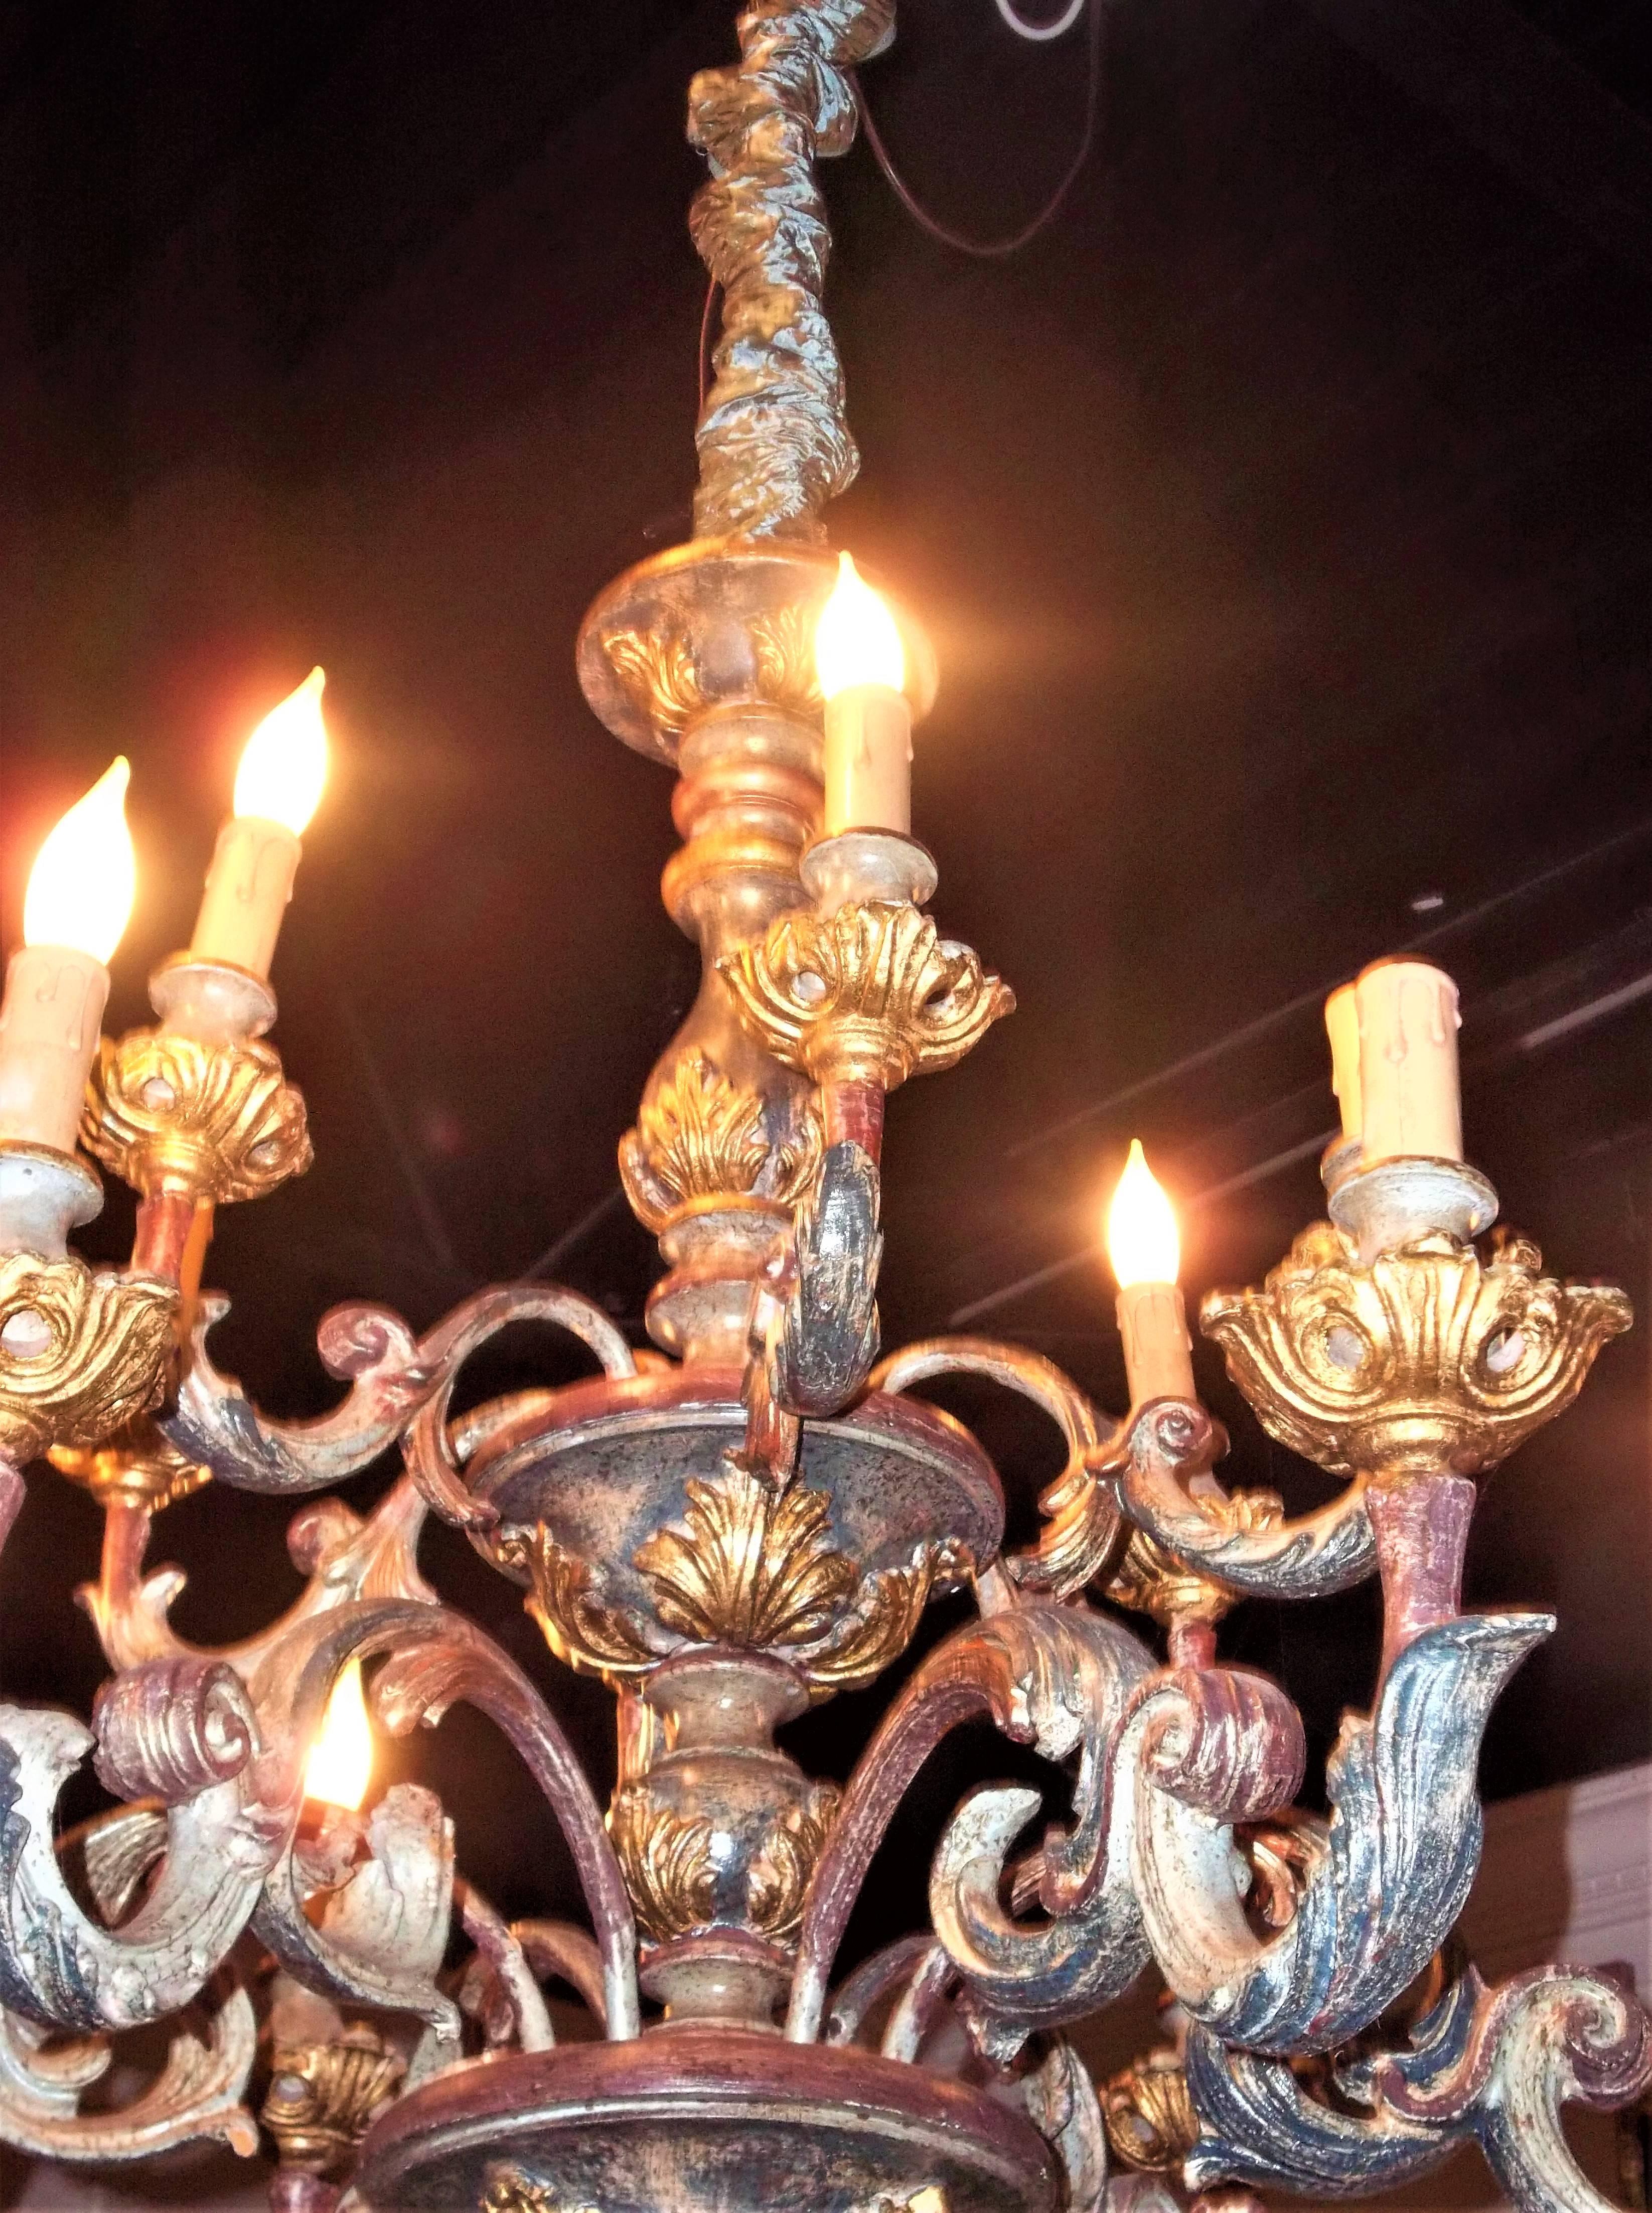 20th century. In Italian Rococo or Louis XV taste, rewired to USA specs. Unmarked or labeled as to origin so just a best guess Italy. Two tiers of six lights each. Measures: 32 tall (excluding chain) 31 wide.